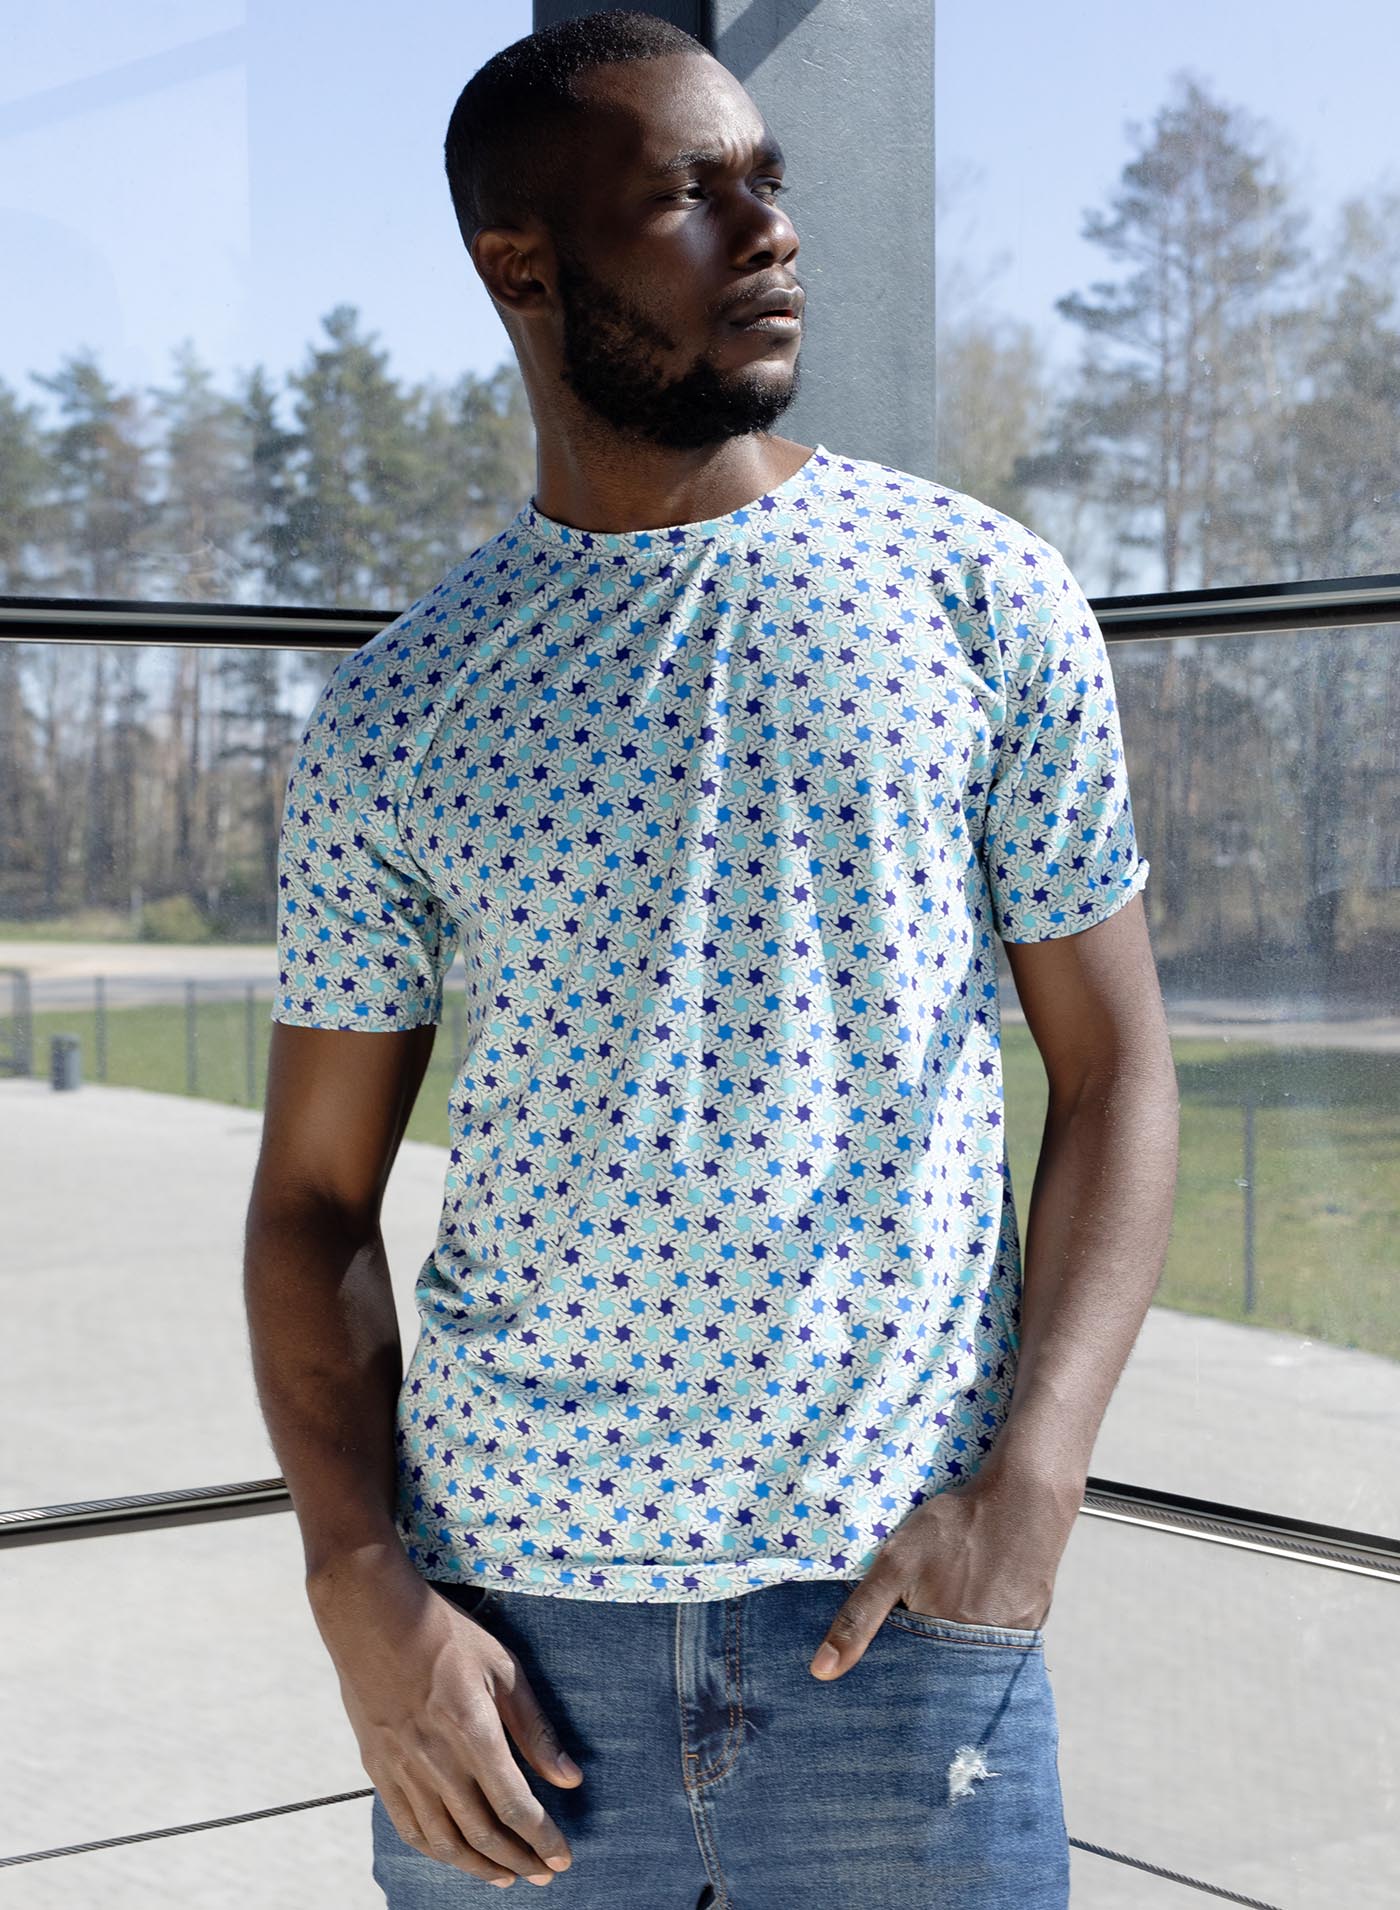 Man modeling an All over dye sublimation t-shirt featuring a patter of bones based on Islamic ornamental art in blue colors.